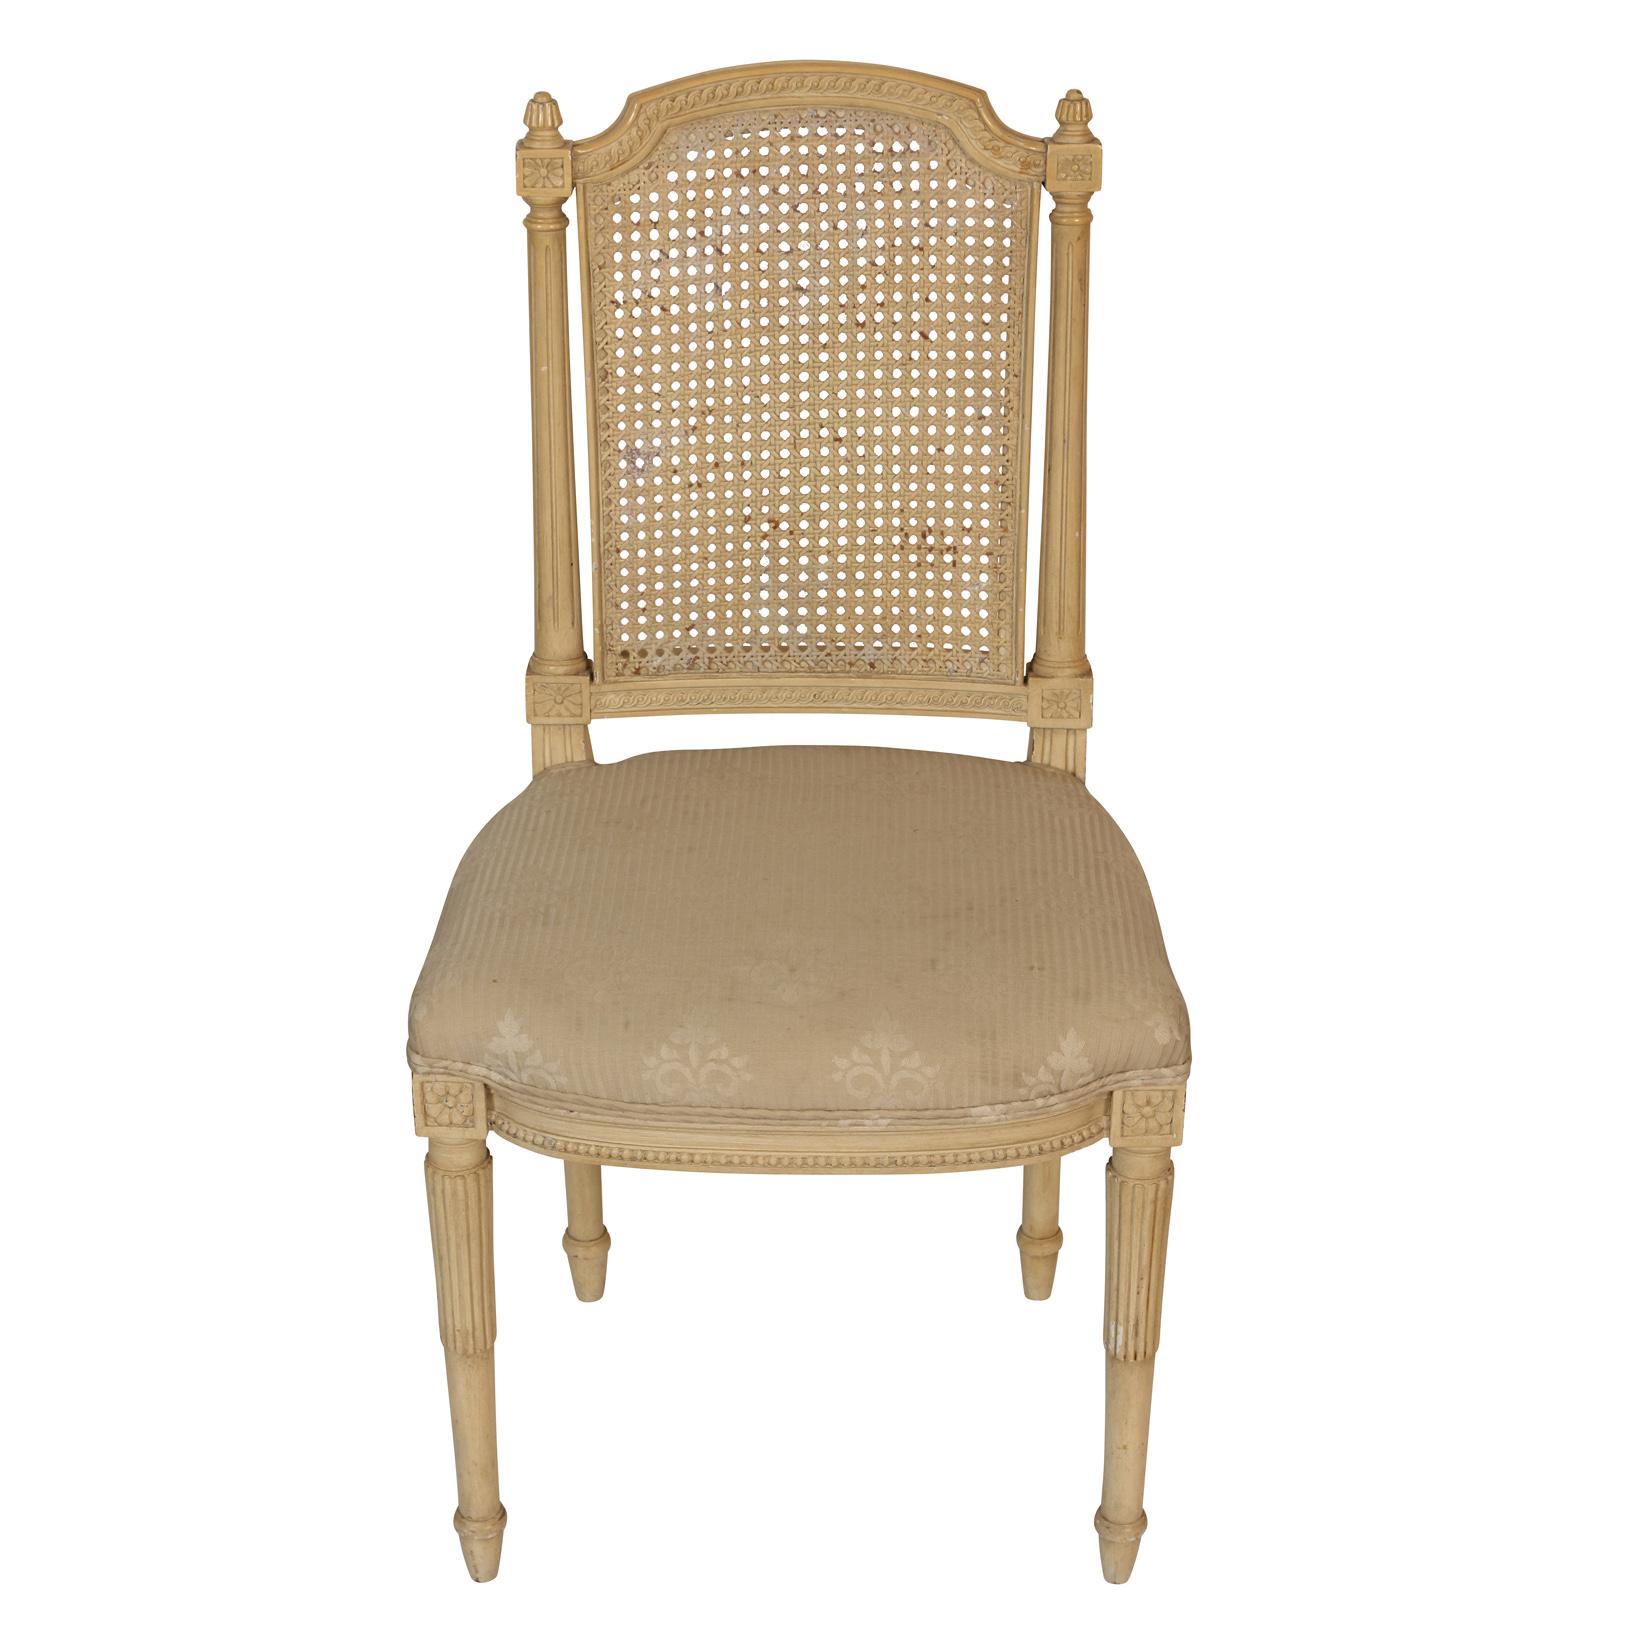 Set of Four Caned Back Dining Chairs with Upholstered Seats (20. Jahrhundert) im Angebot